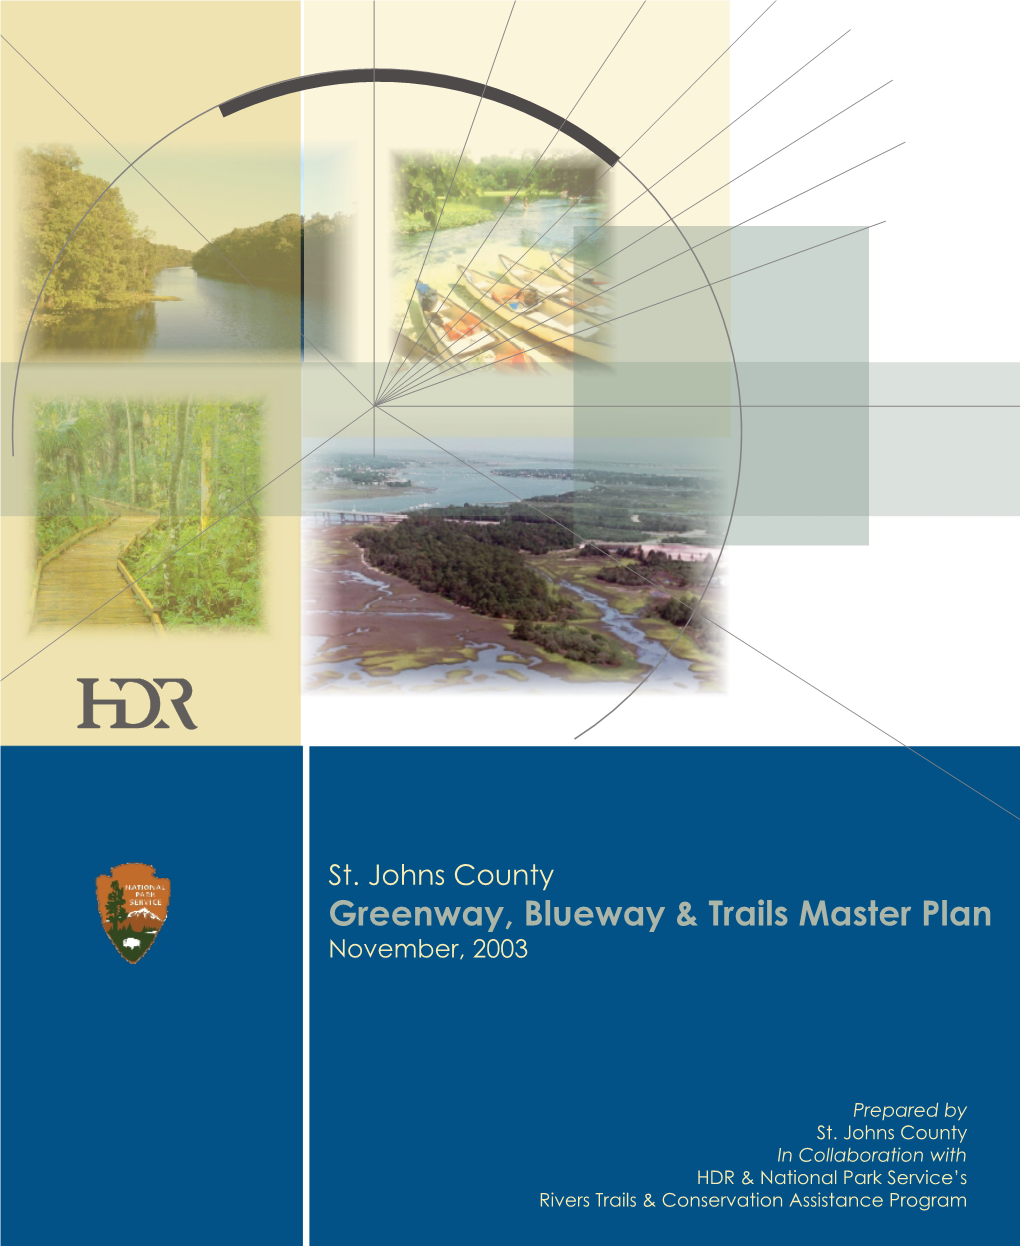 St. Johns County Greenway, Blueway & Trails Master Plan